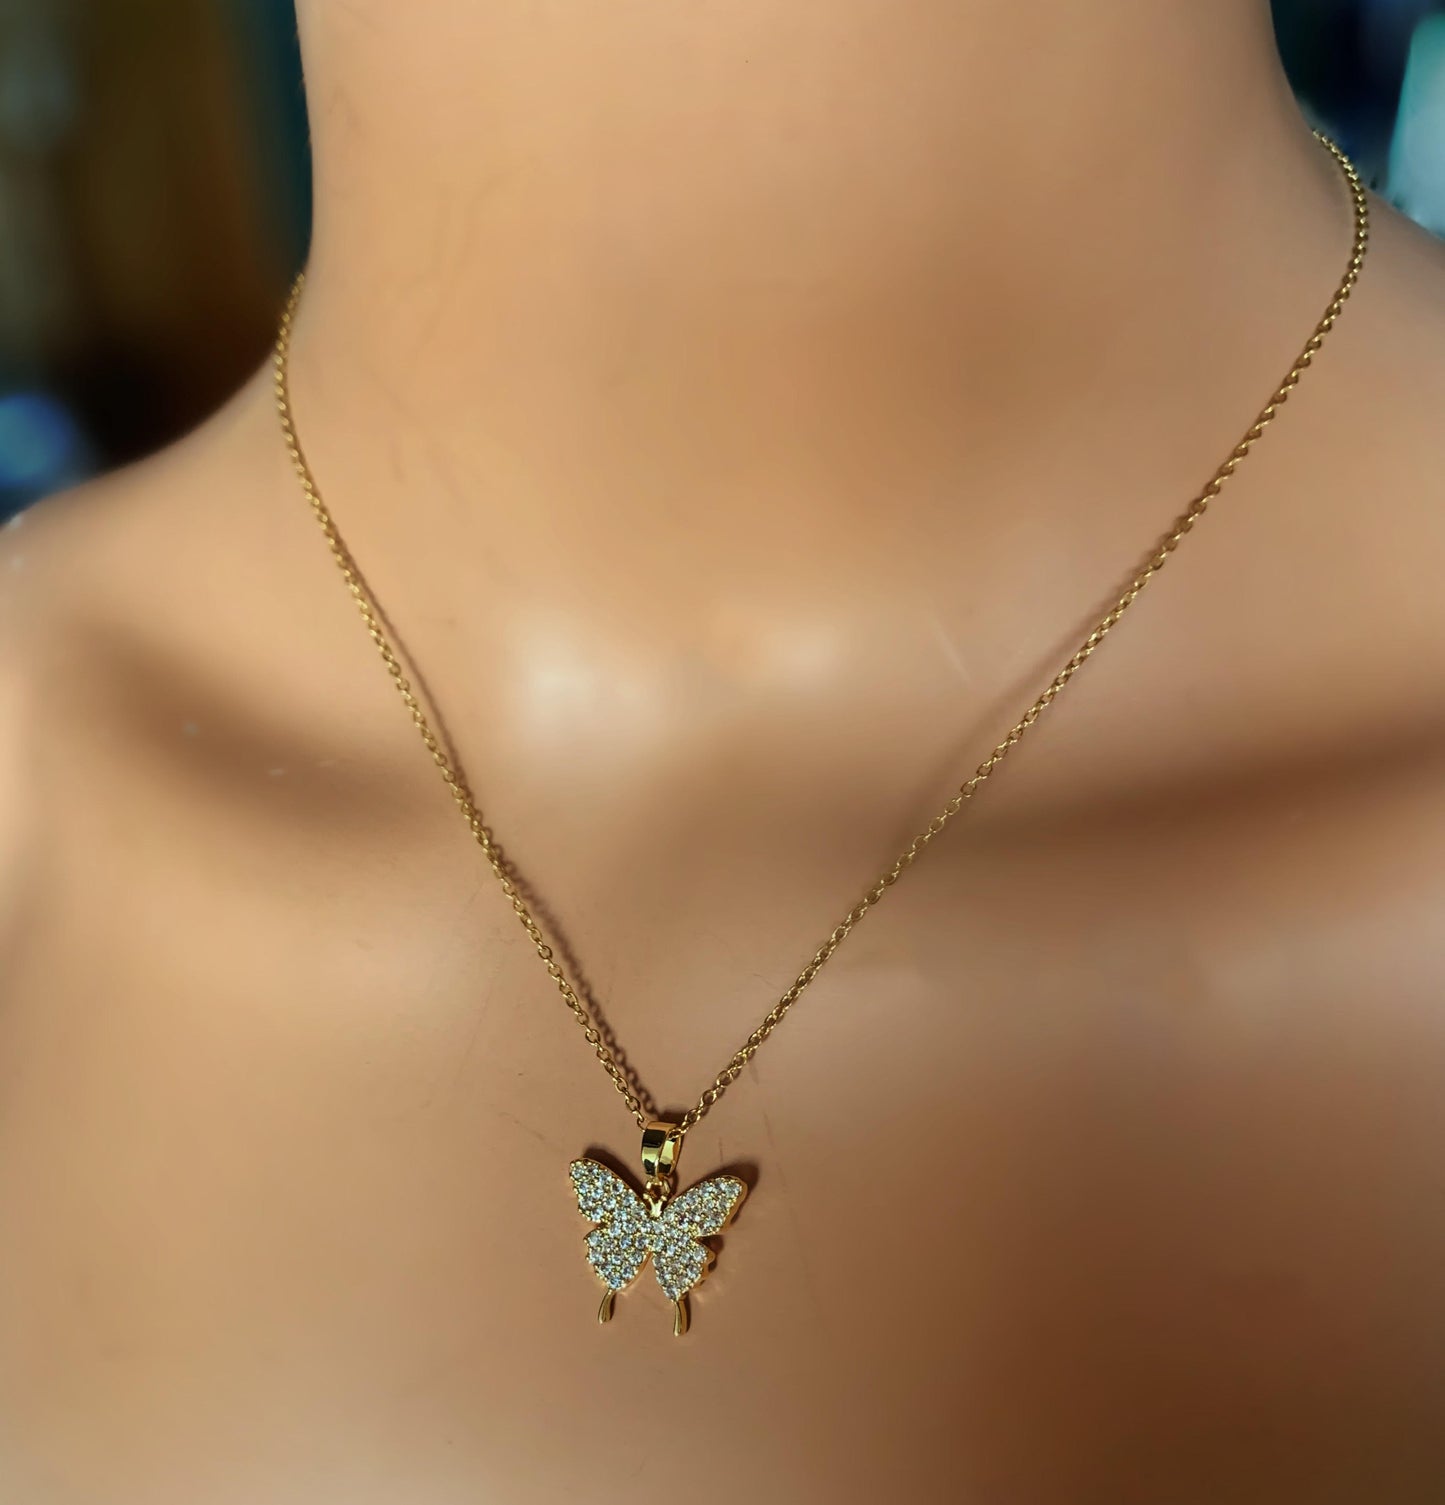 Butterfly Pendant and Chain